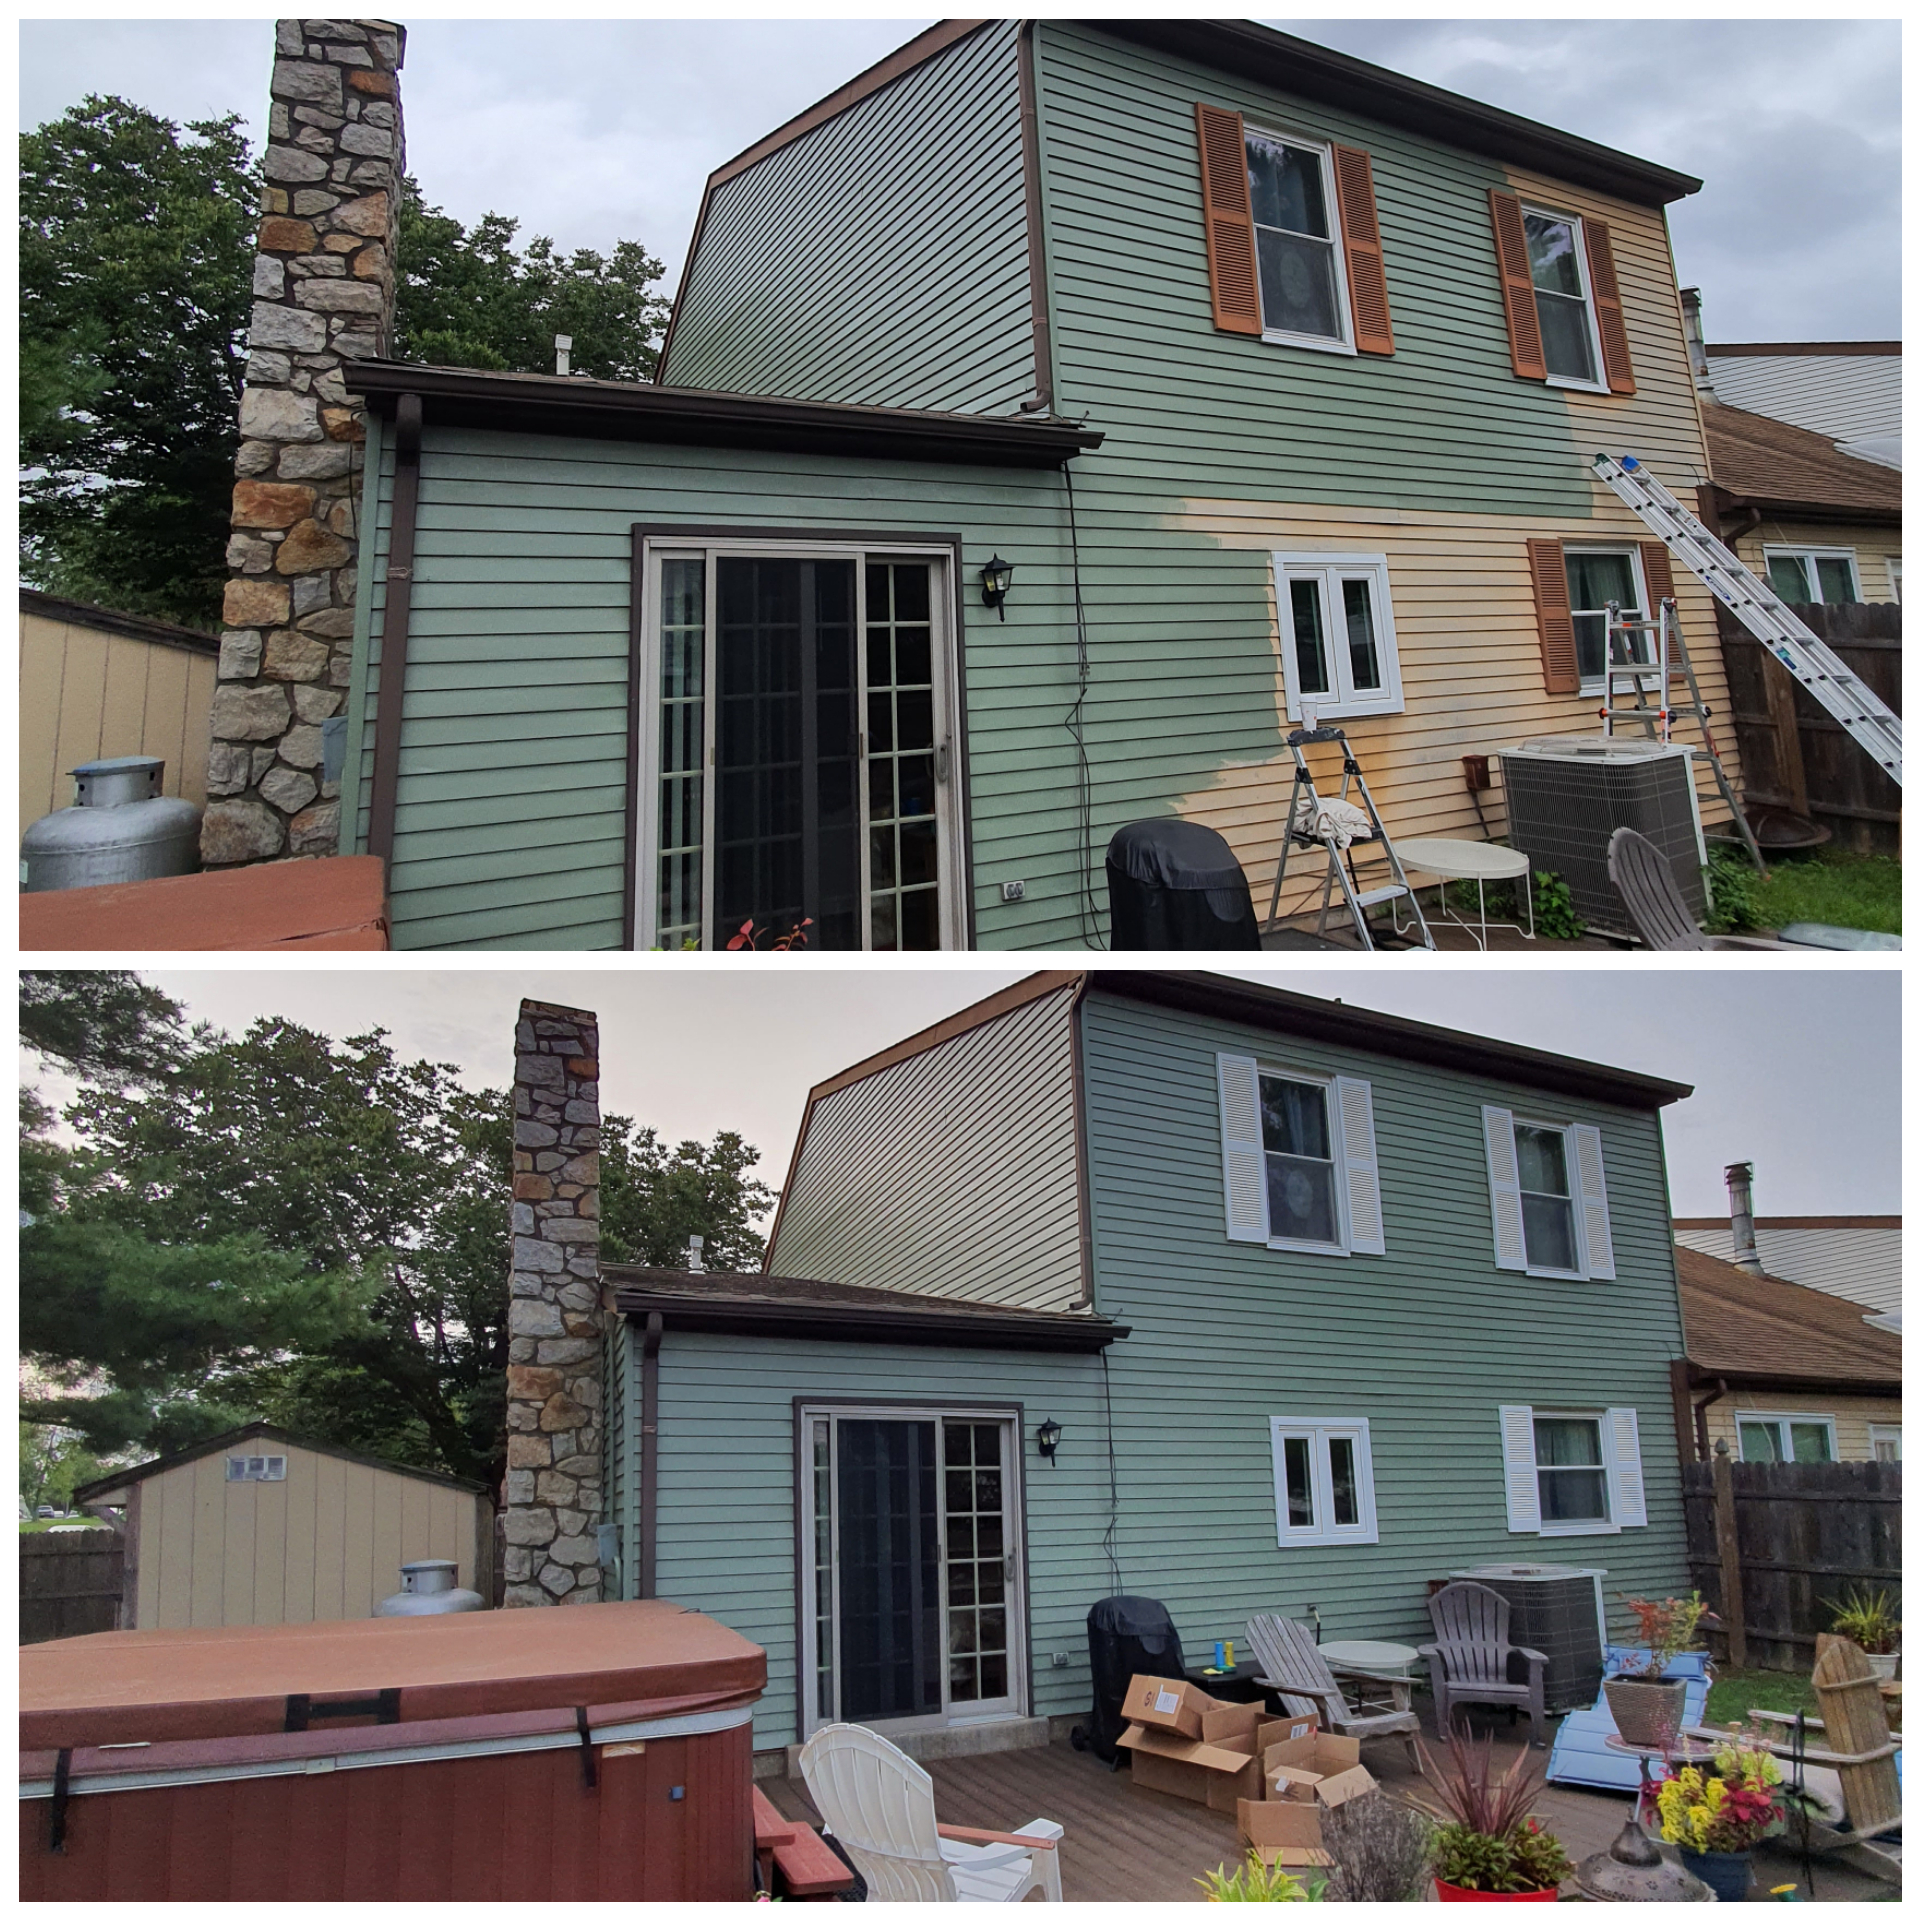 power washing and painting company in bucks county, in montgomery county, in greater philadelphia